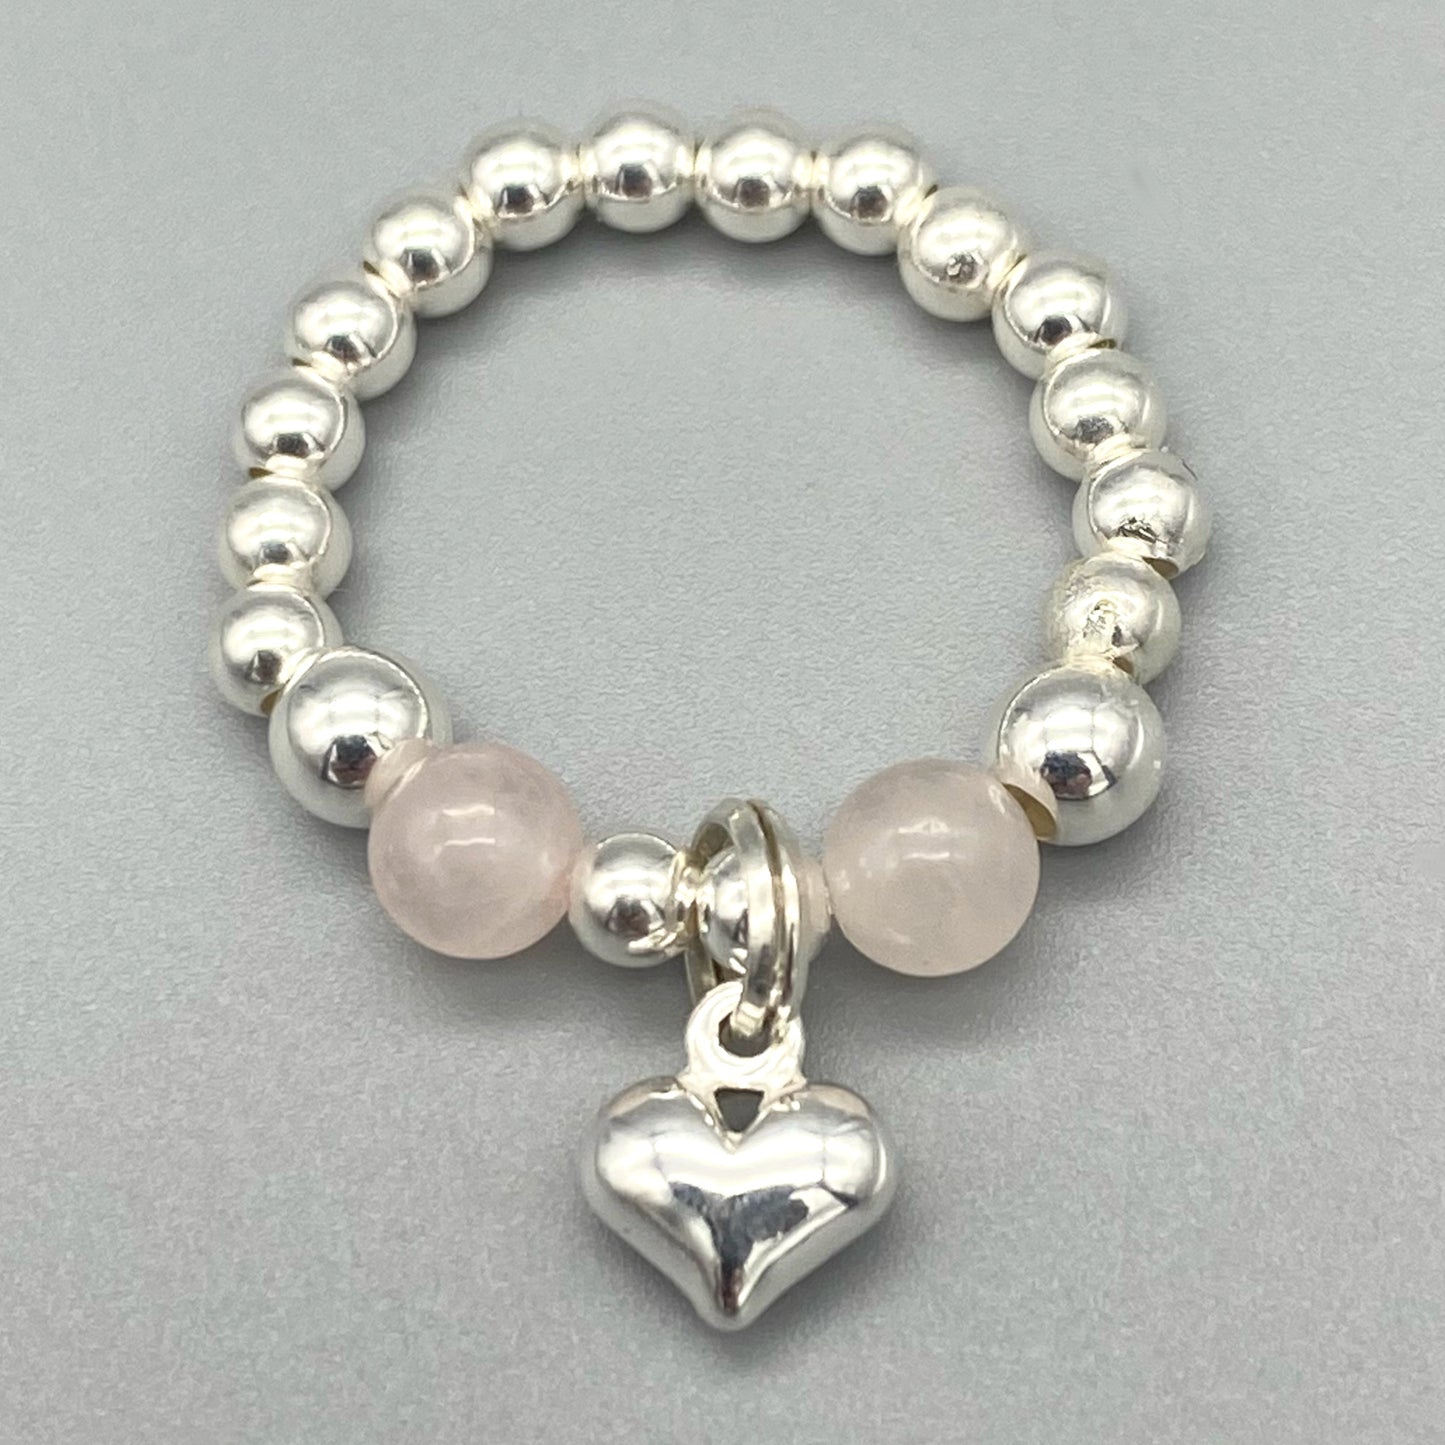 Heart charm & rose quartz healing crystal women's silver stacking ring by My Silver Wish